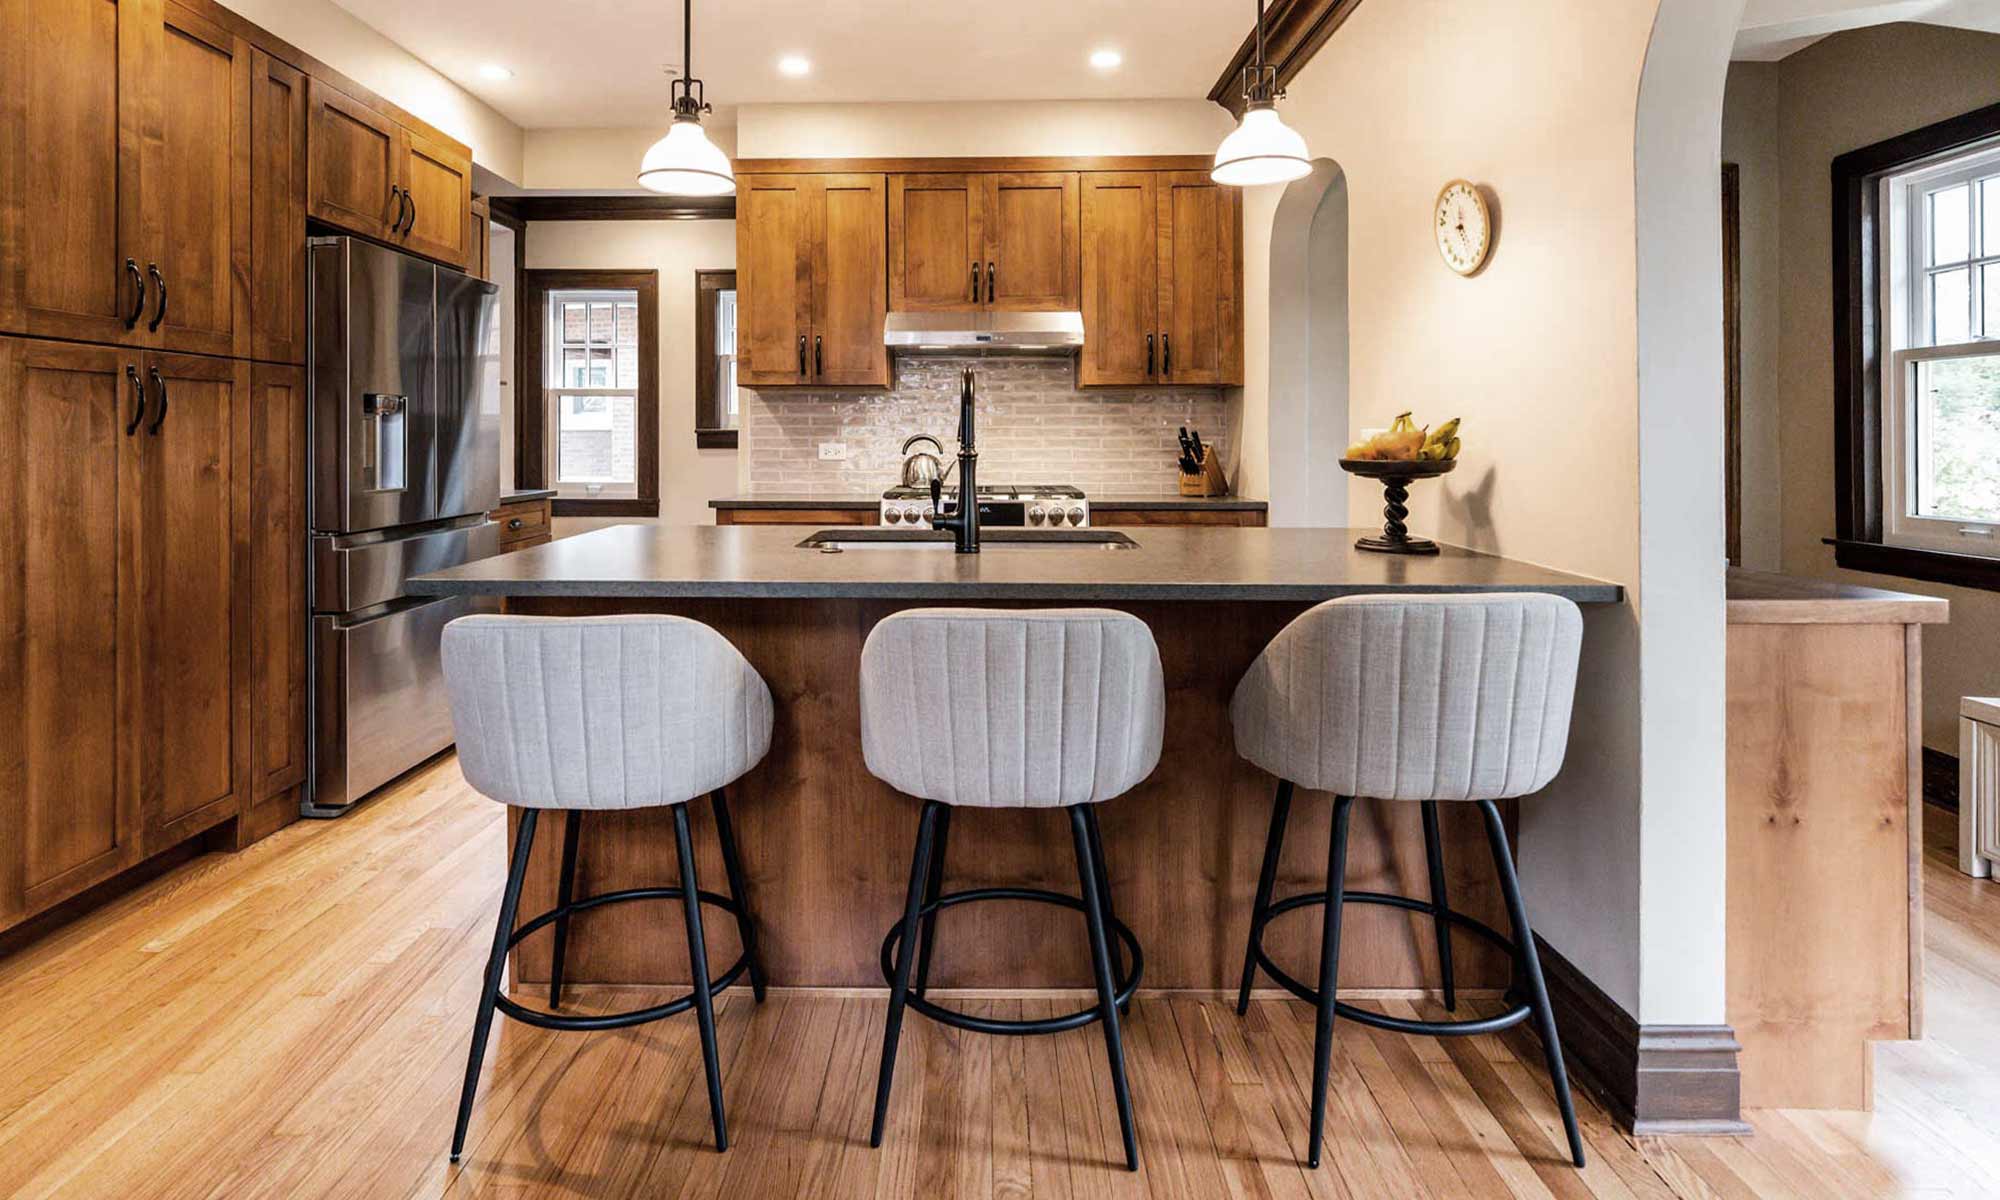 kitchen remodel from livcompanies wood cabinetry three grey barstools 2 pendants recess lighting